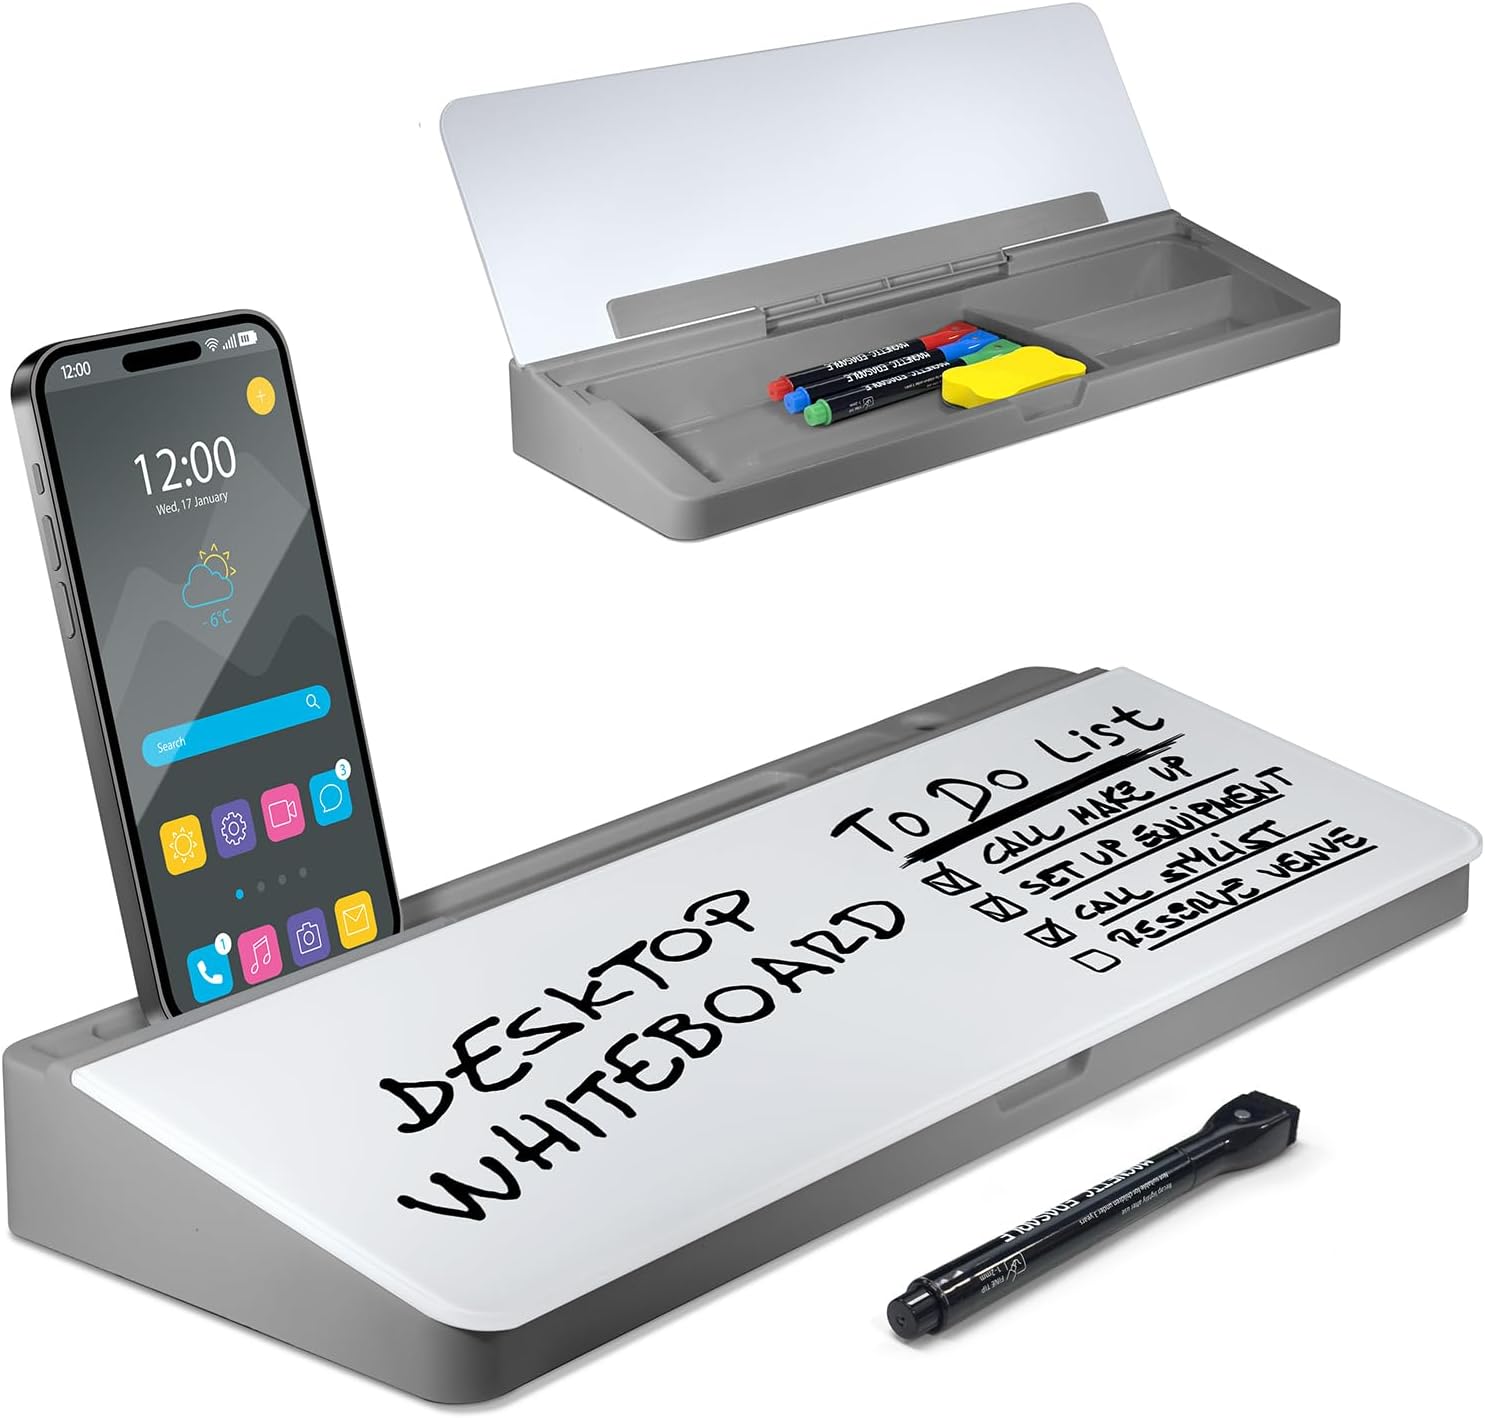 Desktop Whiteboard With Phone Holder - Glass Dry Erase Whiteboard - Markers Included